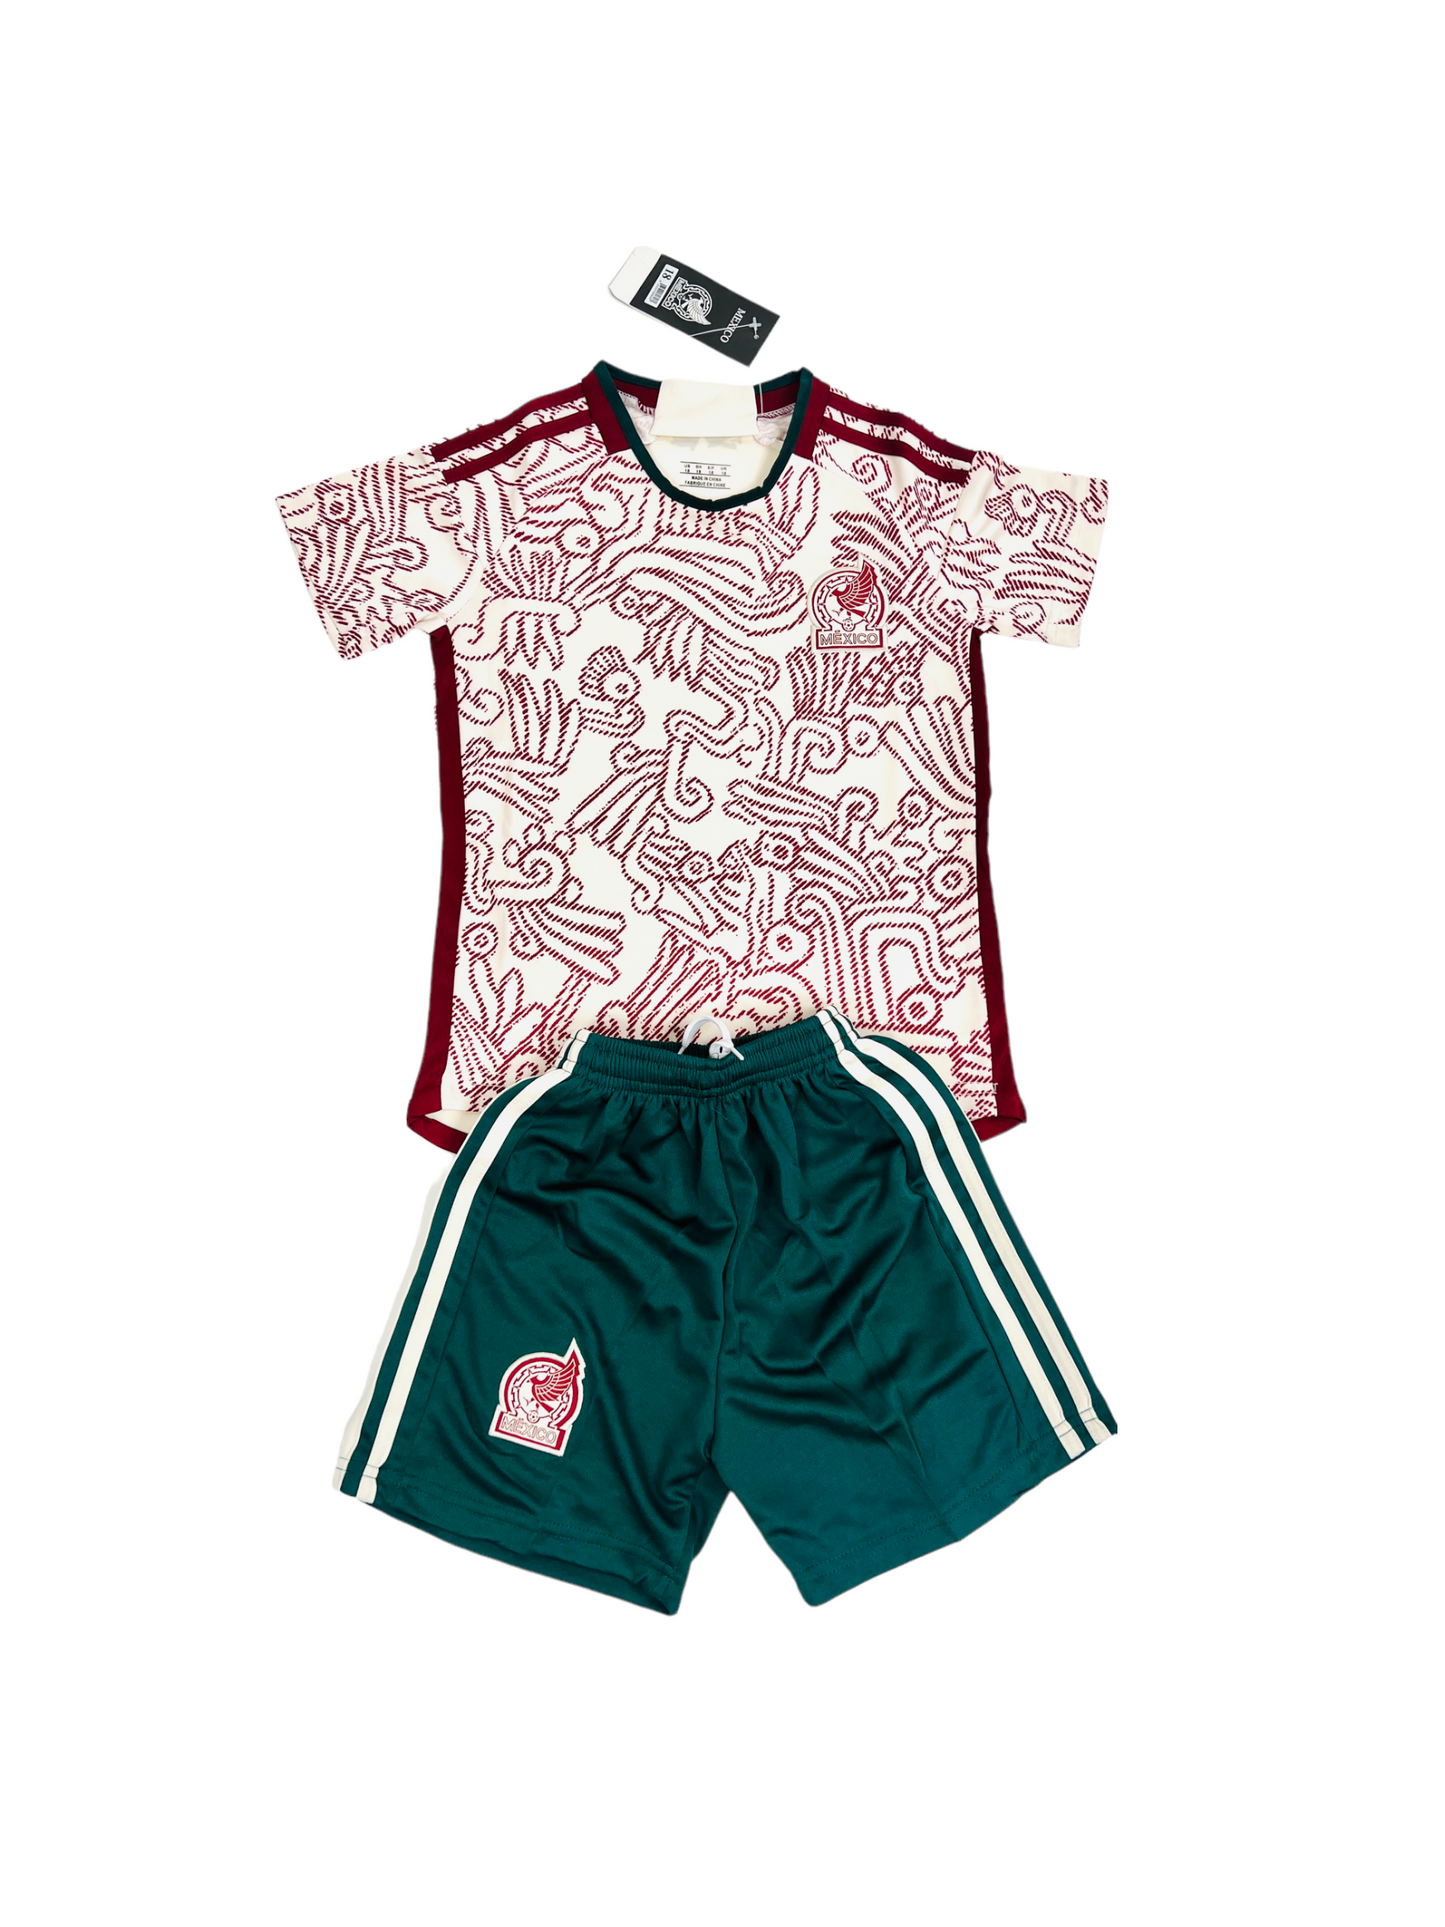 Mexico Away Youth soccer set